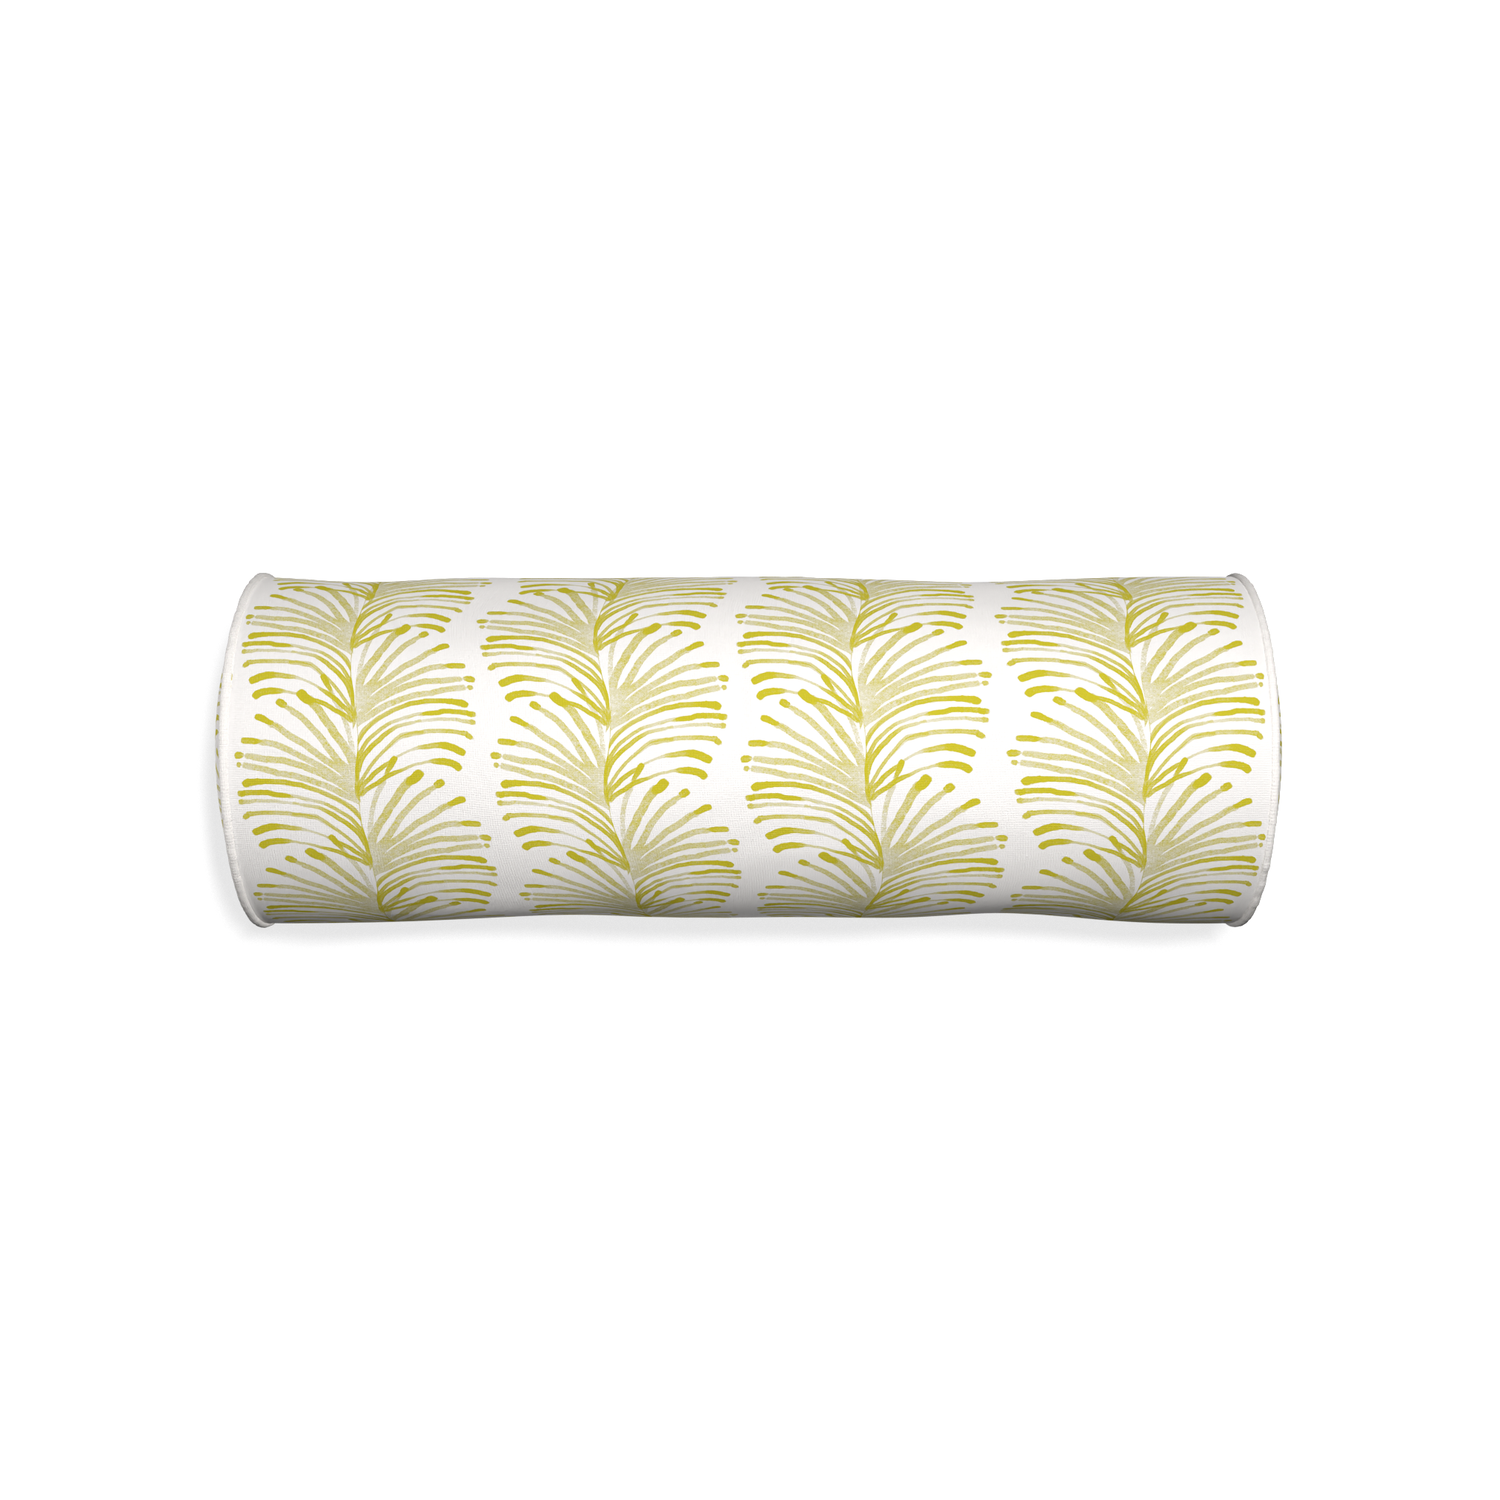 Bolster emma chartreuse custom pillow with snow piping on white background